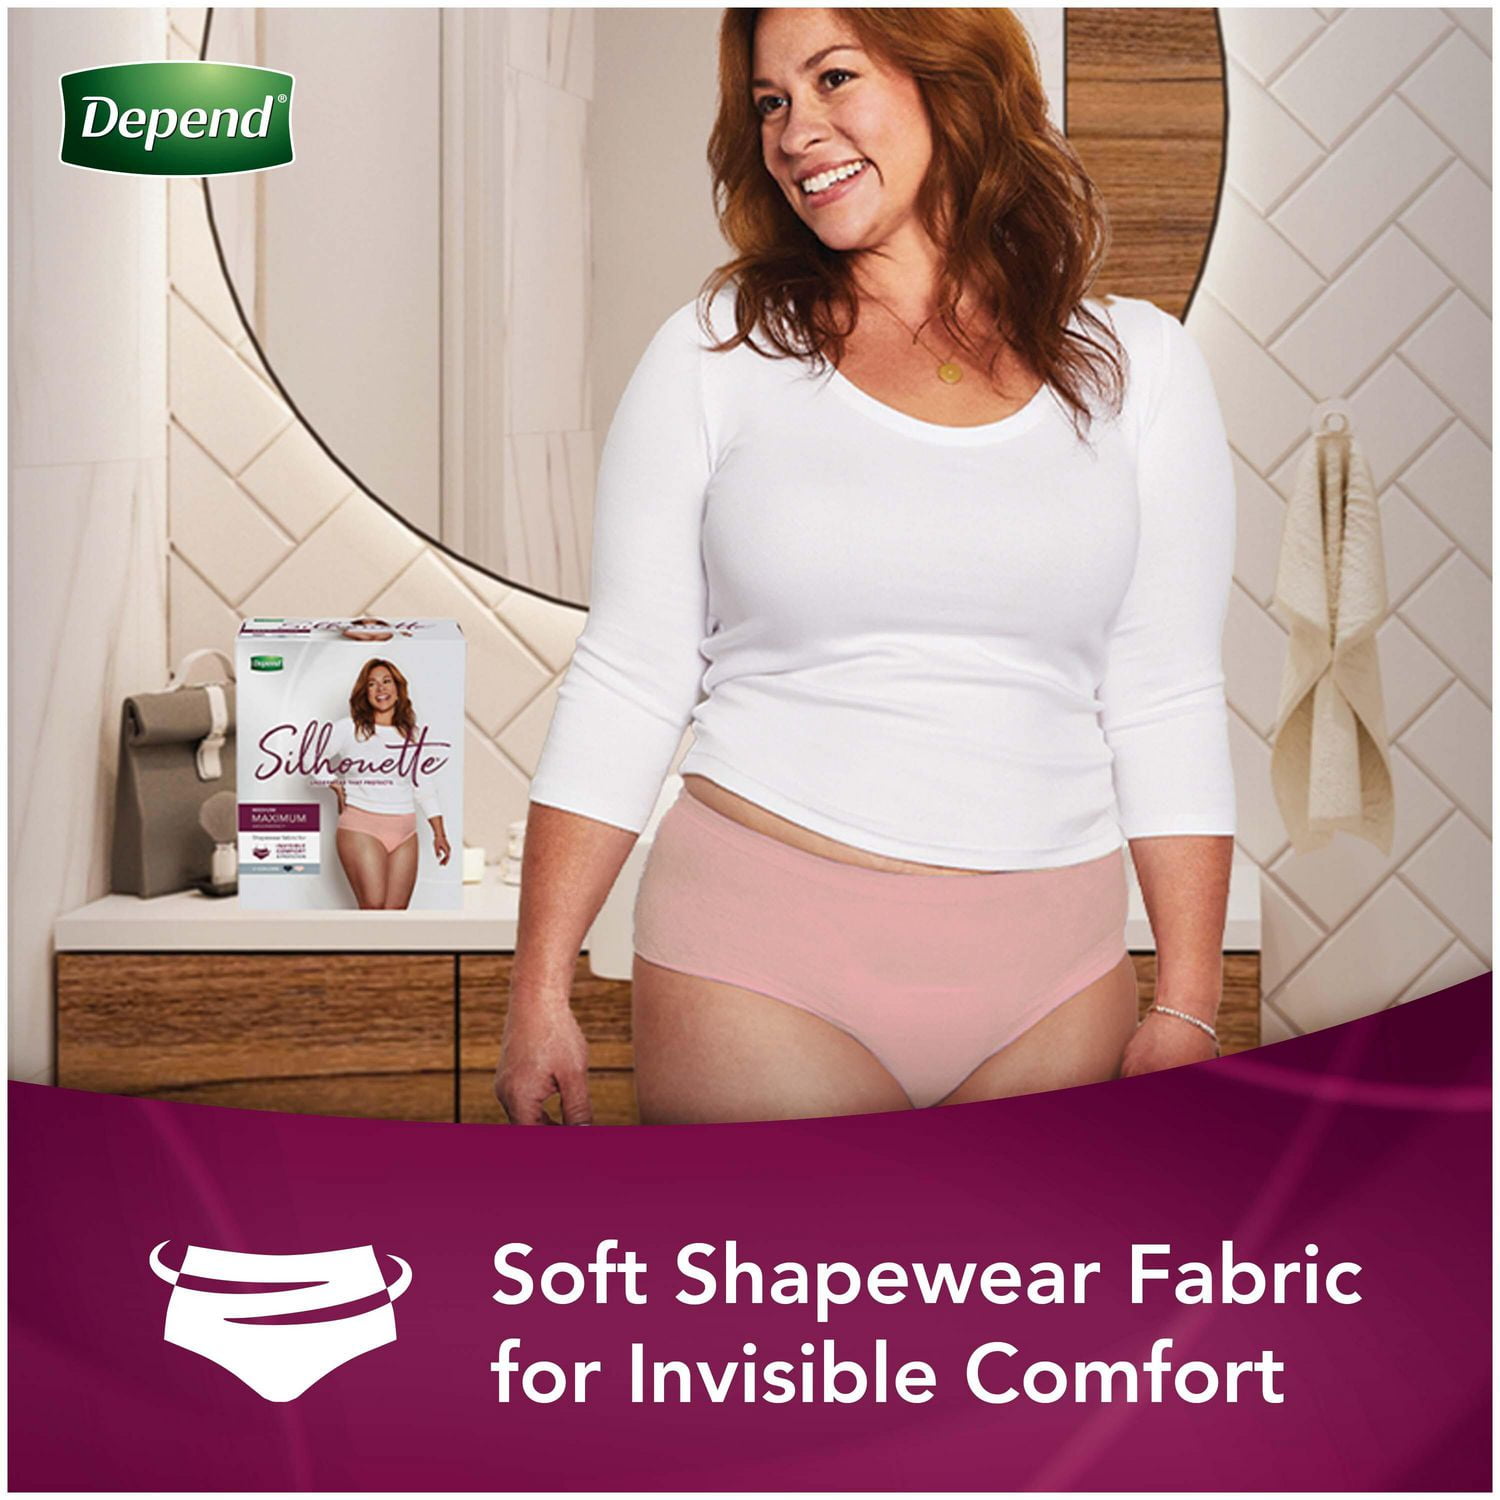 Incontinence Pants for Women - Maximum Comfort & Absorbency